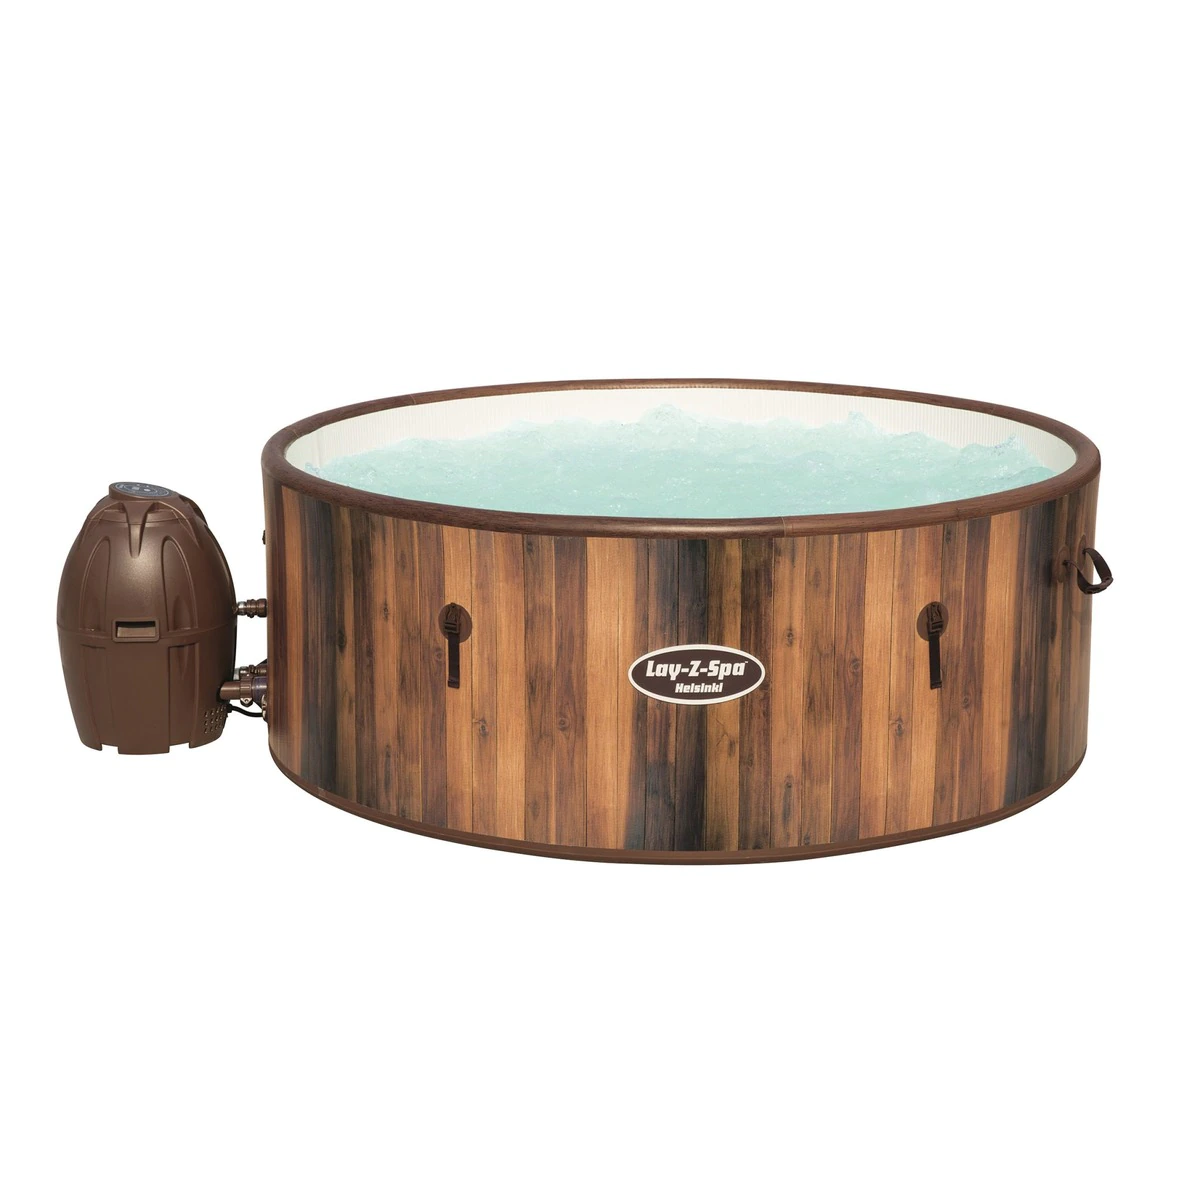 Spa Inflable Lay-Z Helsinki